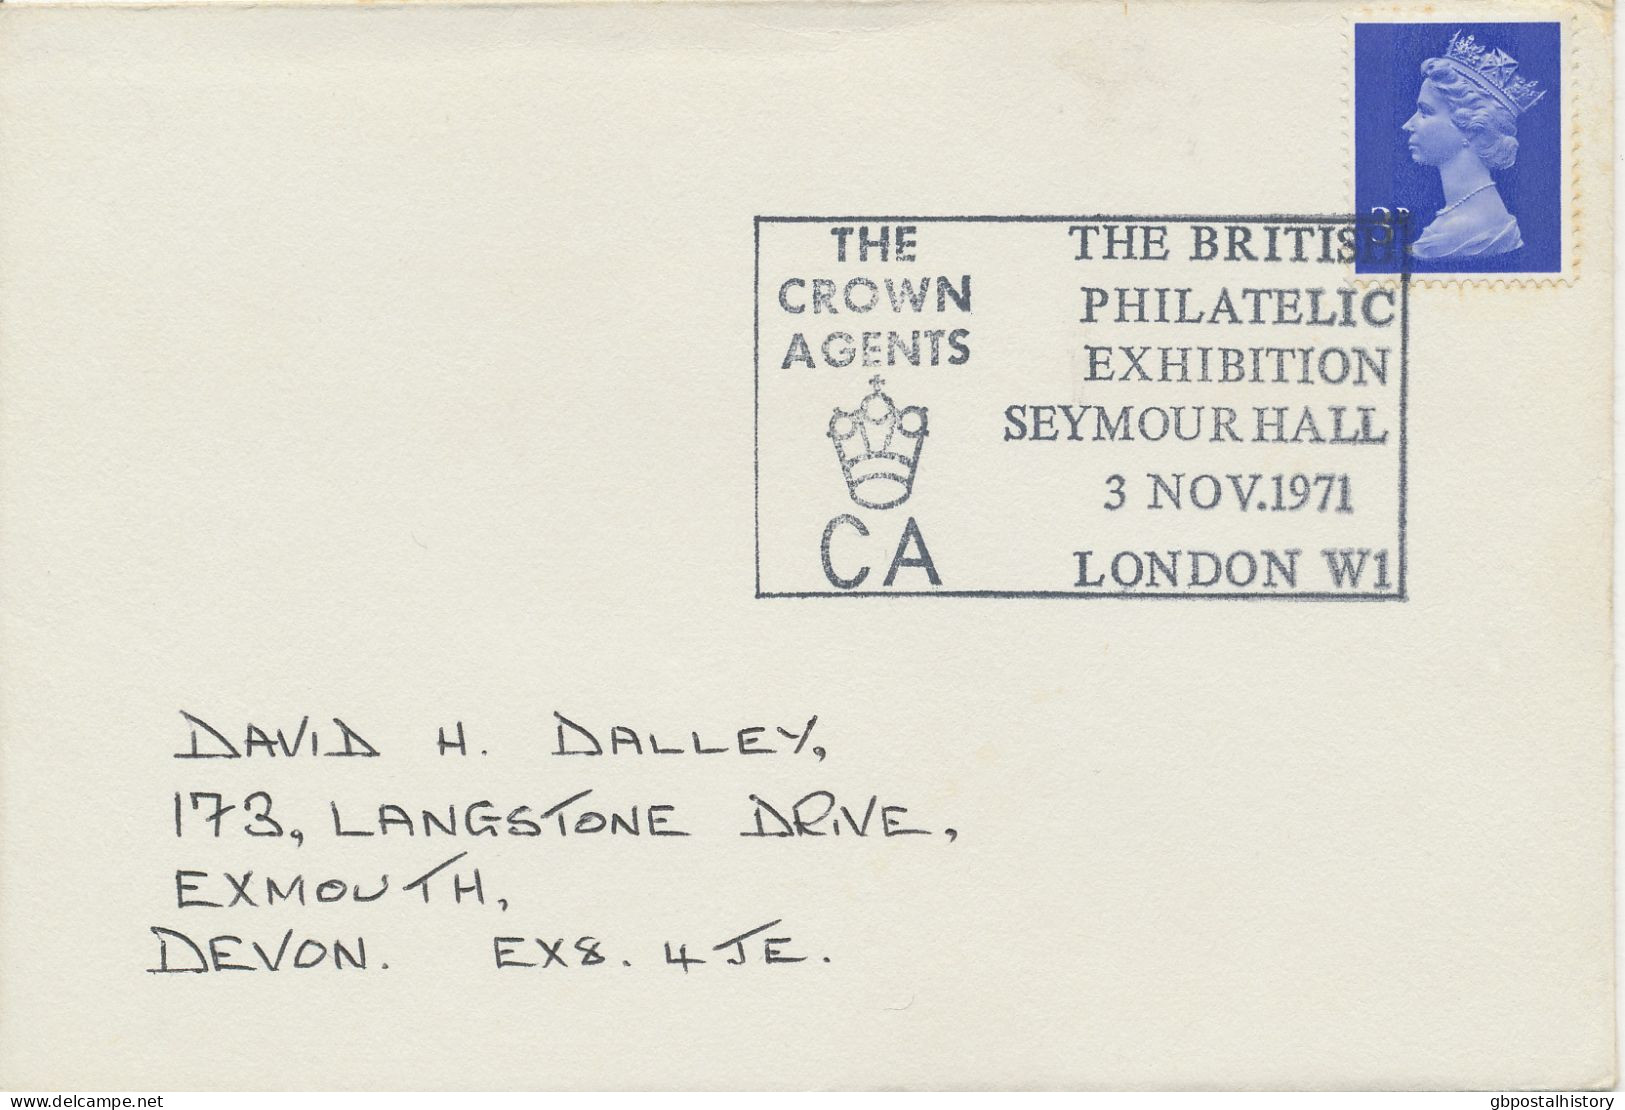 GB SPECIAL EVENT POSTMARKS 1971 THE BRITISH PHILATELIC EXHIBITION SEYMOUR HALL LONDON W.I. - THE CROWN AGENTS - Covers & Documents